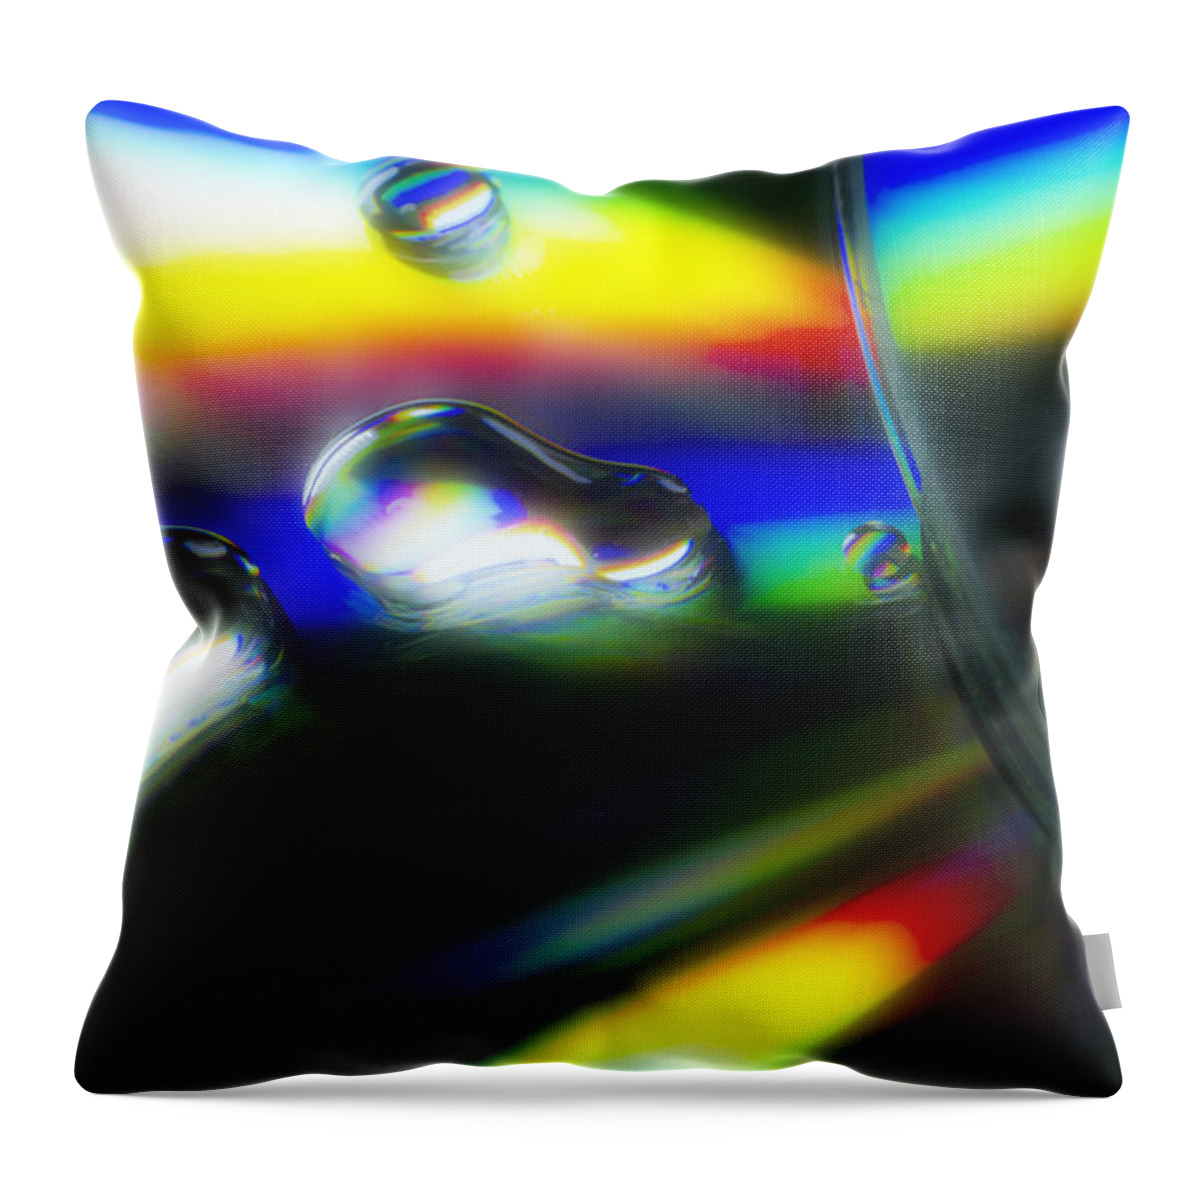 Cd Throw Pillow featuring the photograph Diffused Rainbow Abstract by Sven Brogren